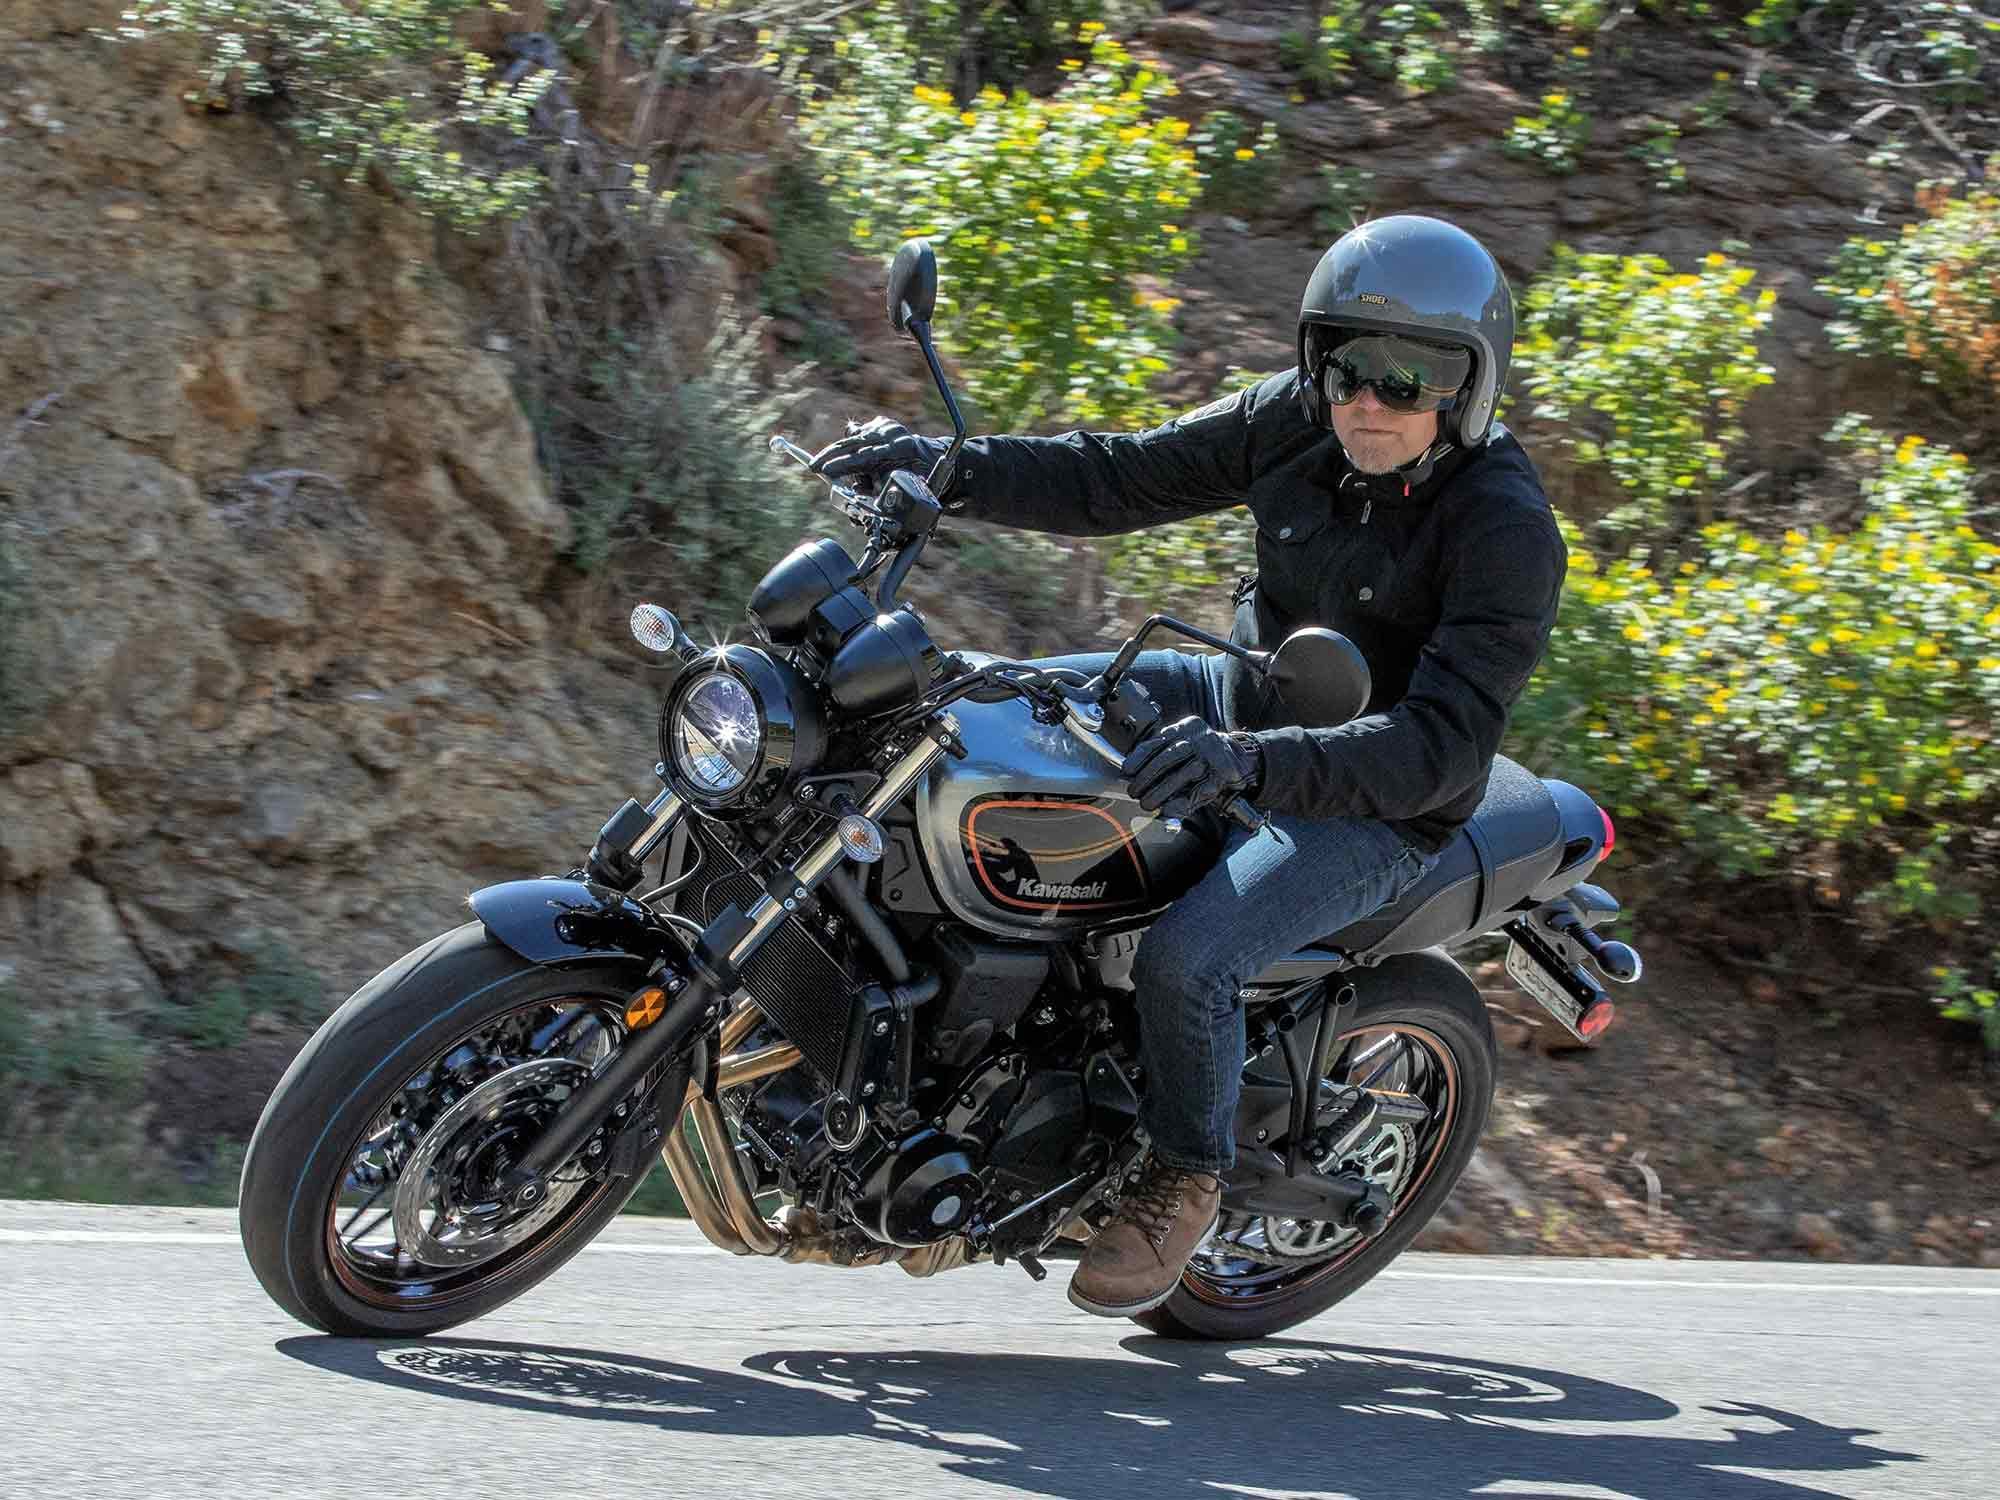 A relaxed riding position and a lightweight chassis makes the Z650RS agile in both canyons and city streets, though the suspension is tuned more for comfort than sport.